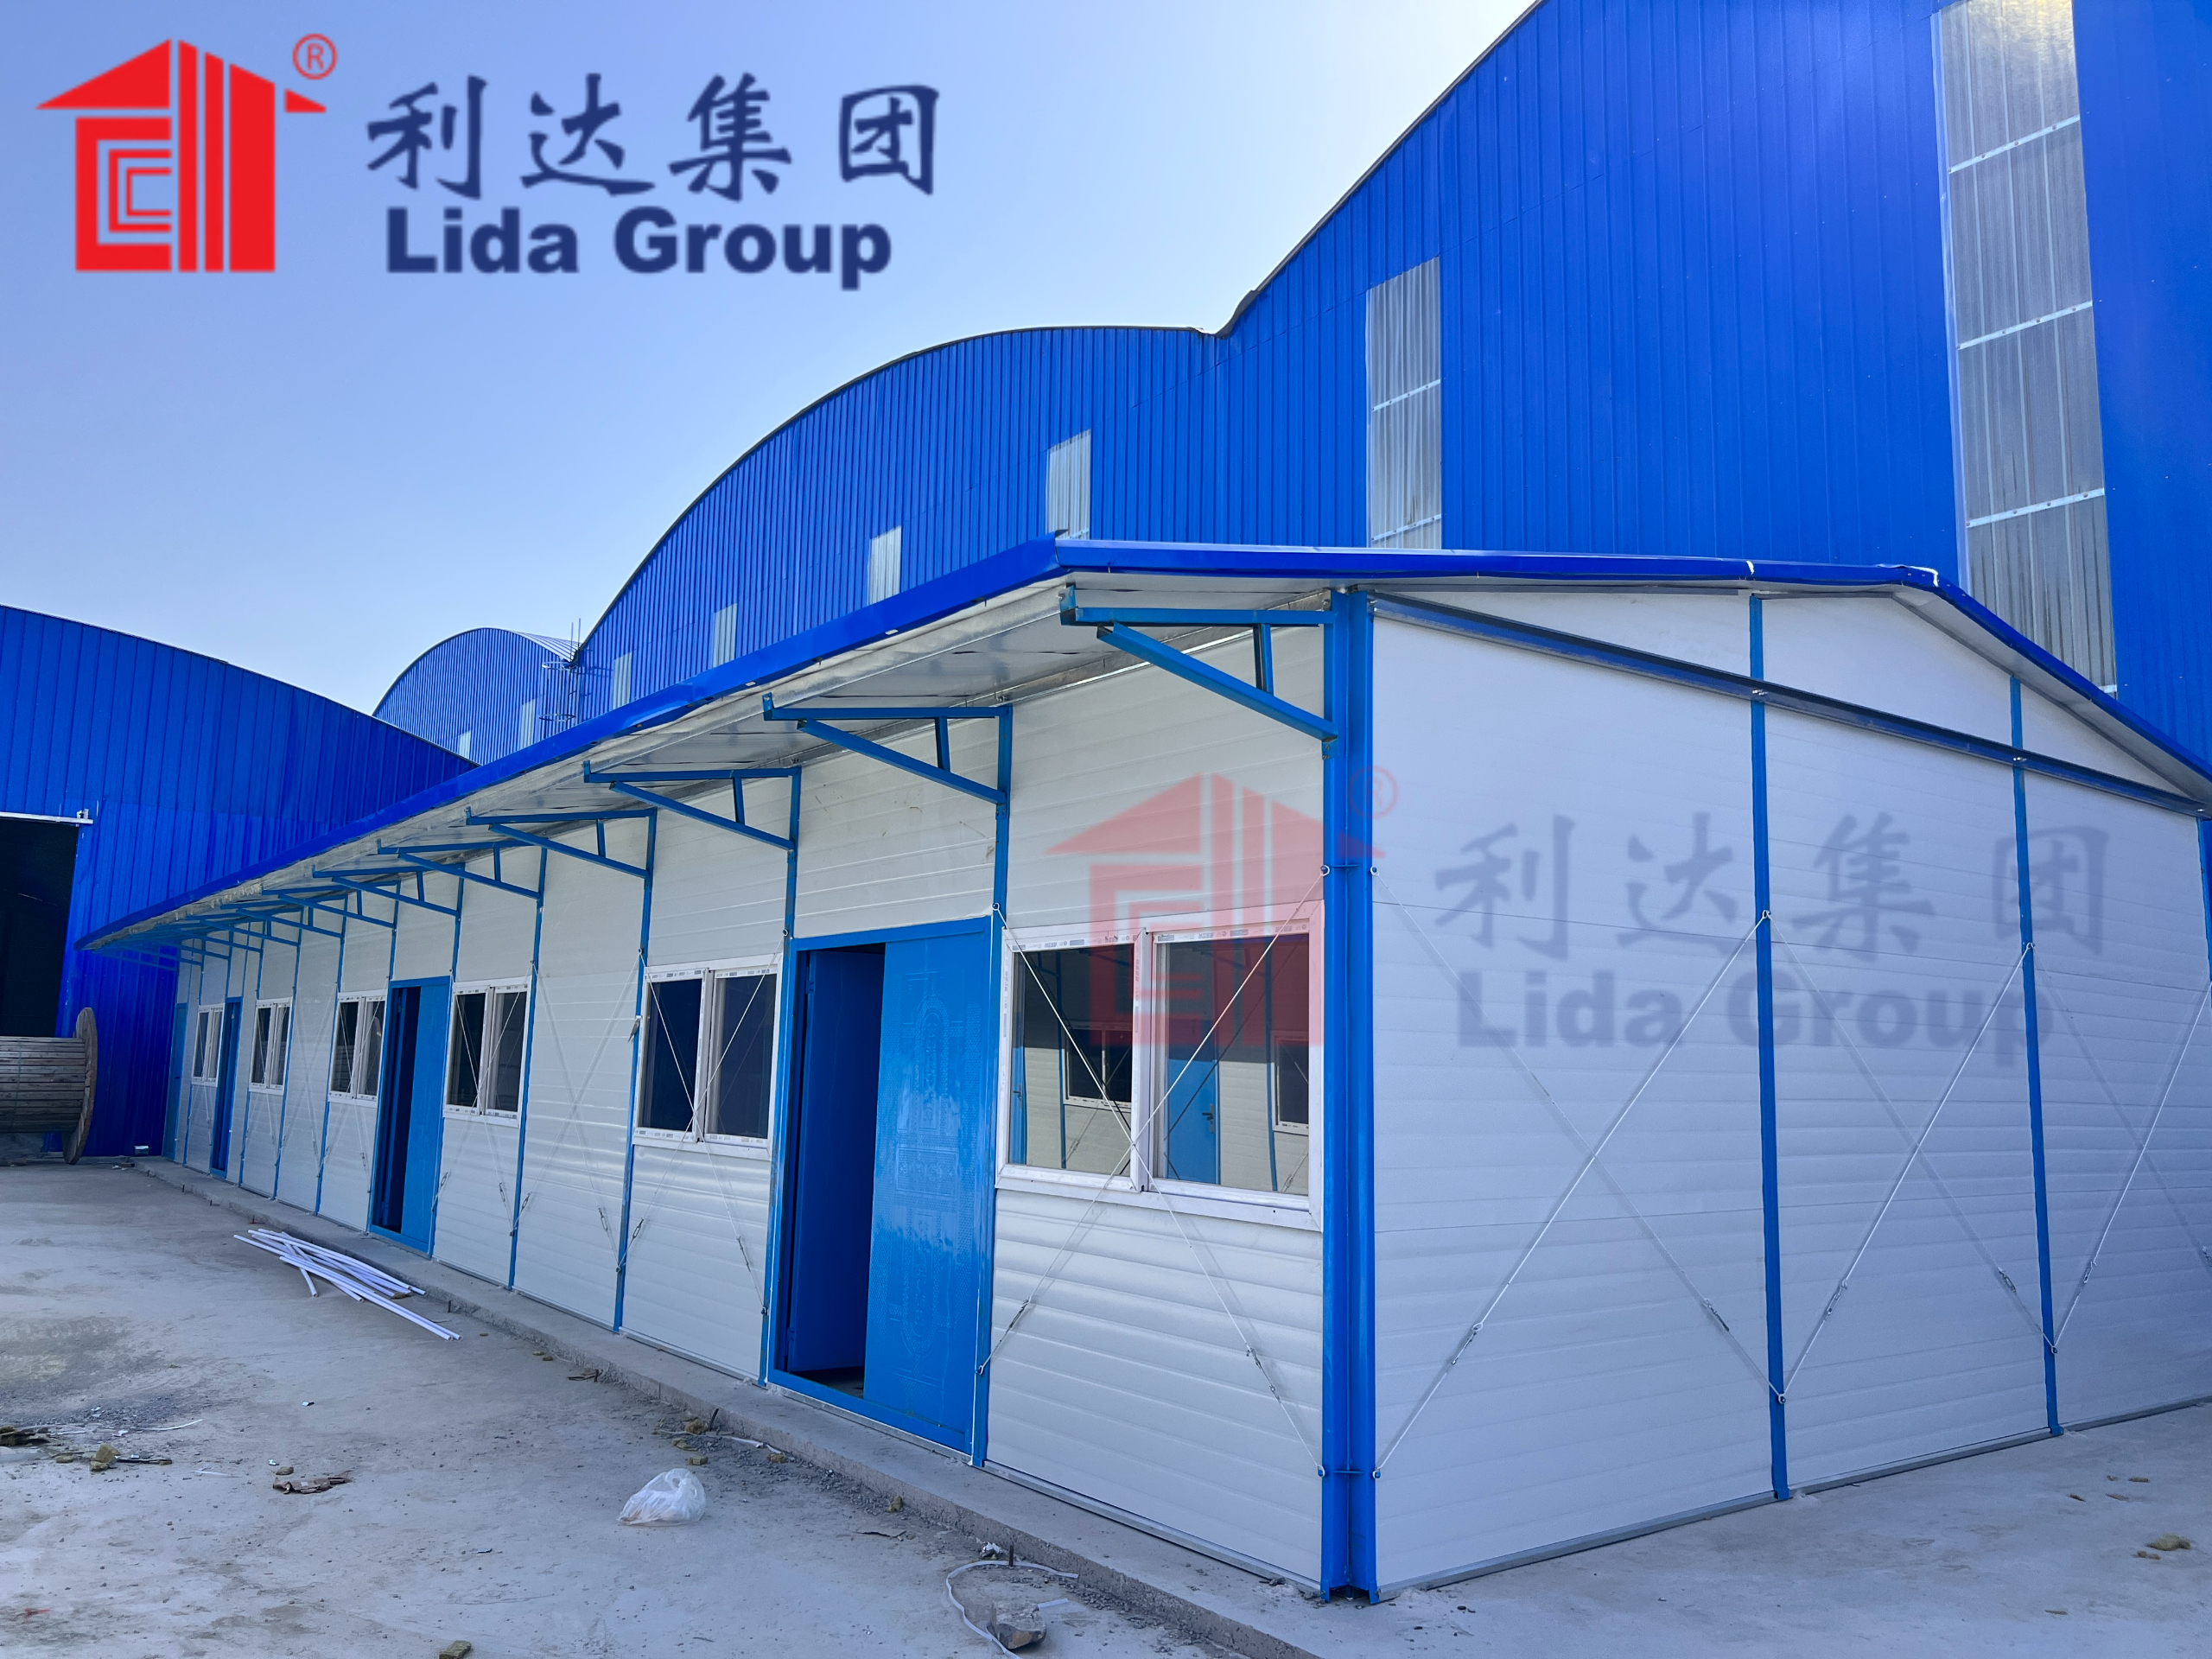 Humanitarians select Lida Group's optimized pre-engineered solutions featuring integrated panelized housing, schools and medical clinics for rapid installation to support pandemic quarantine and triage.